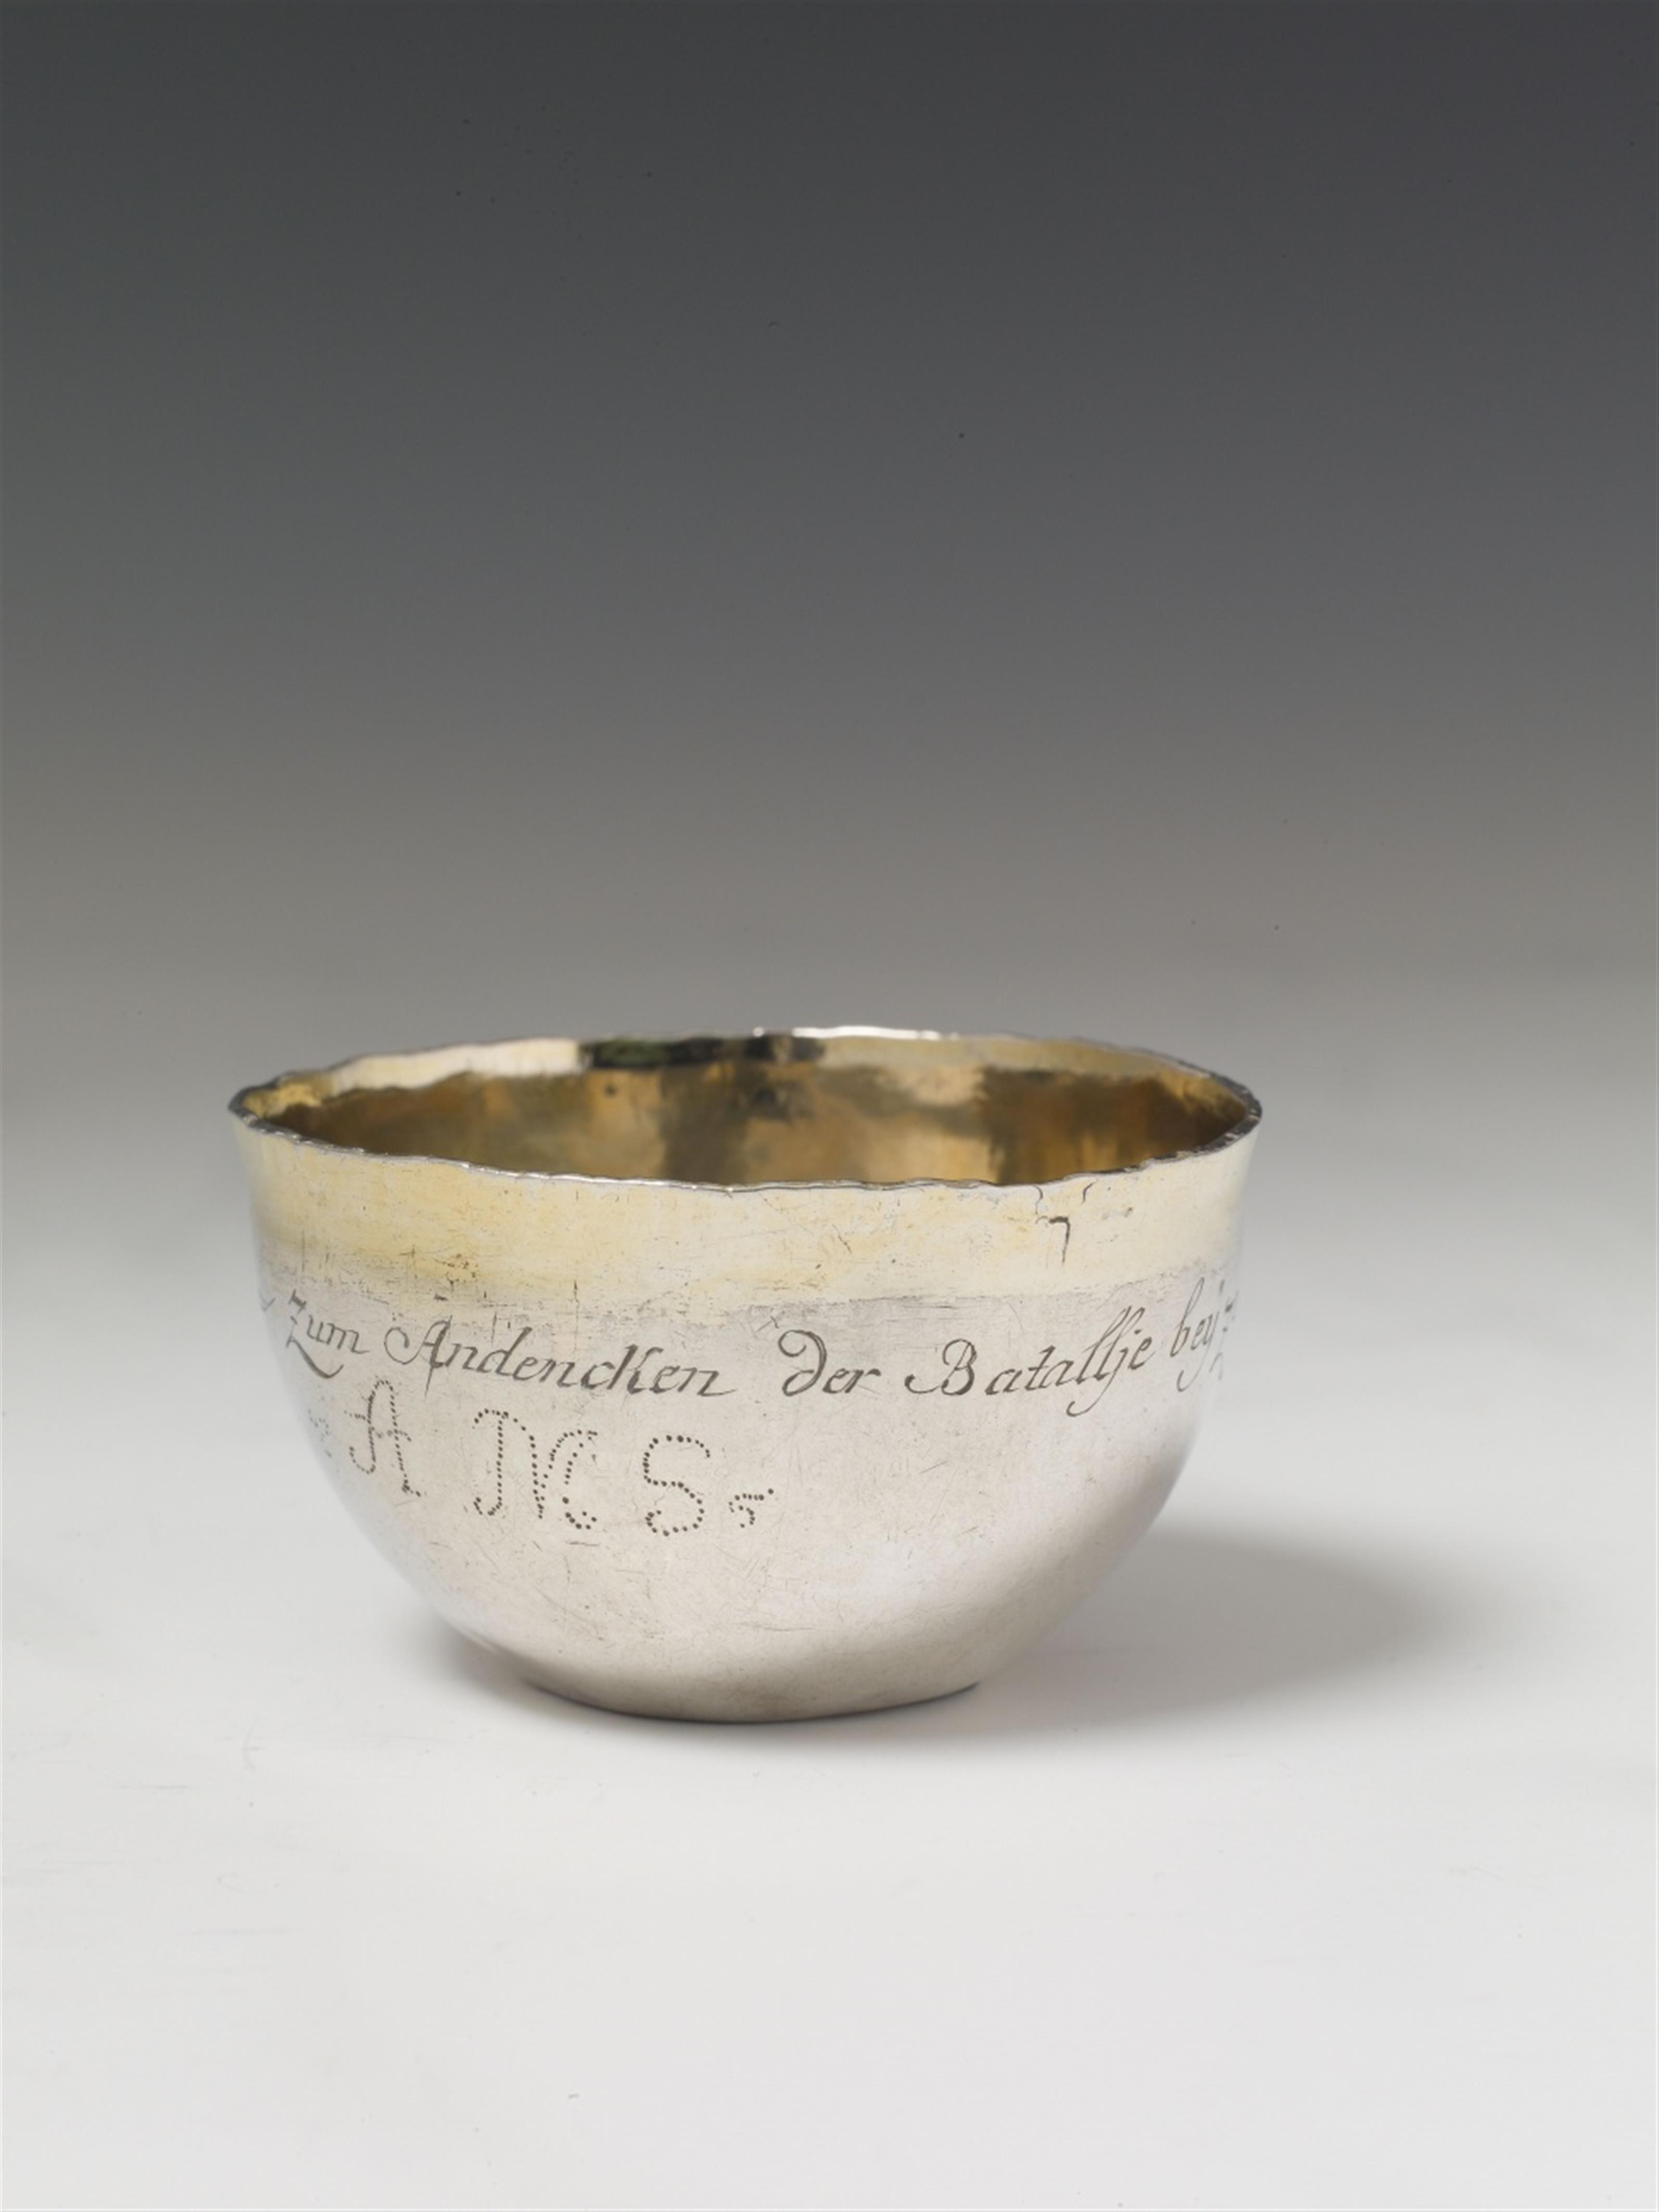 A Prussian silver beaker made from a rubel coin. With remains of gilt. Inscribed "Zum Andenken der Batallje bey Zorndorff" and with a later monogram "AMS". Unmarked, ca. 1760. - image-1